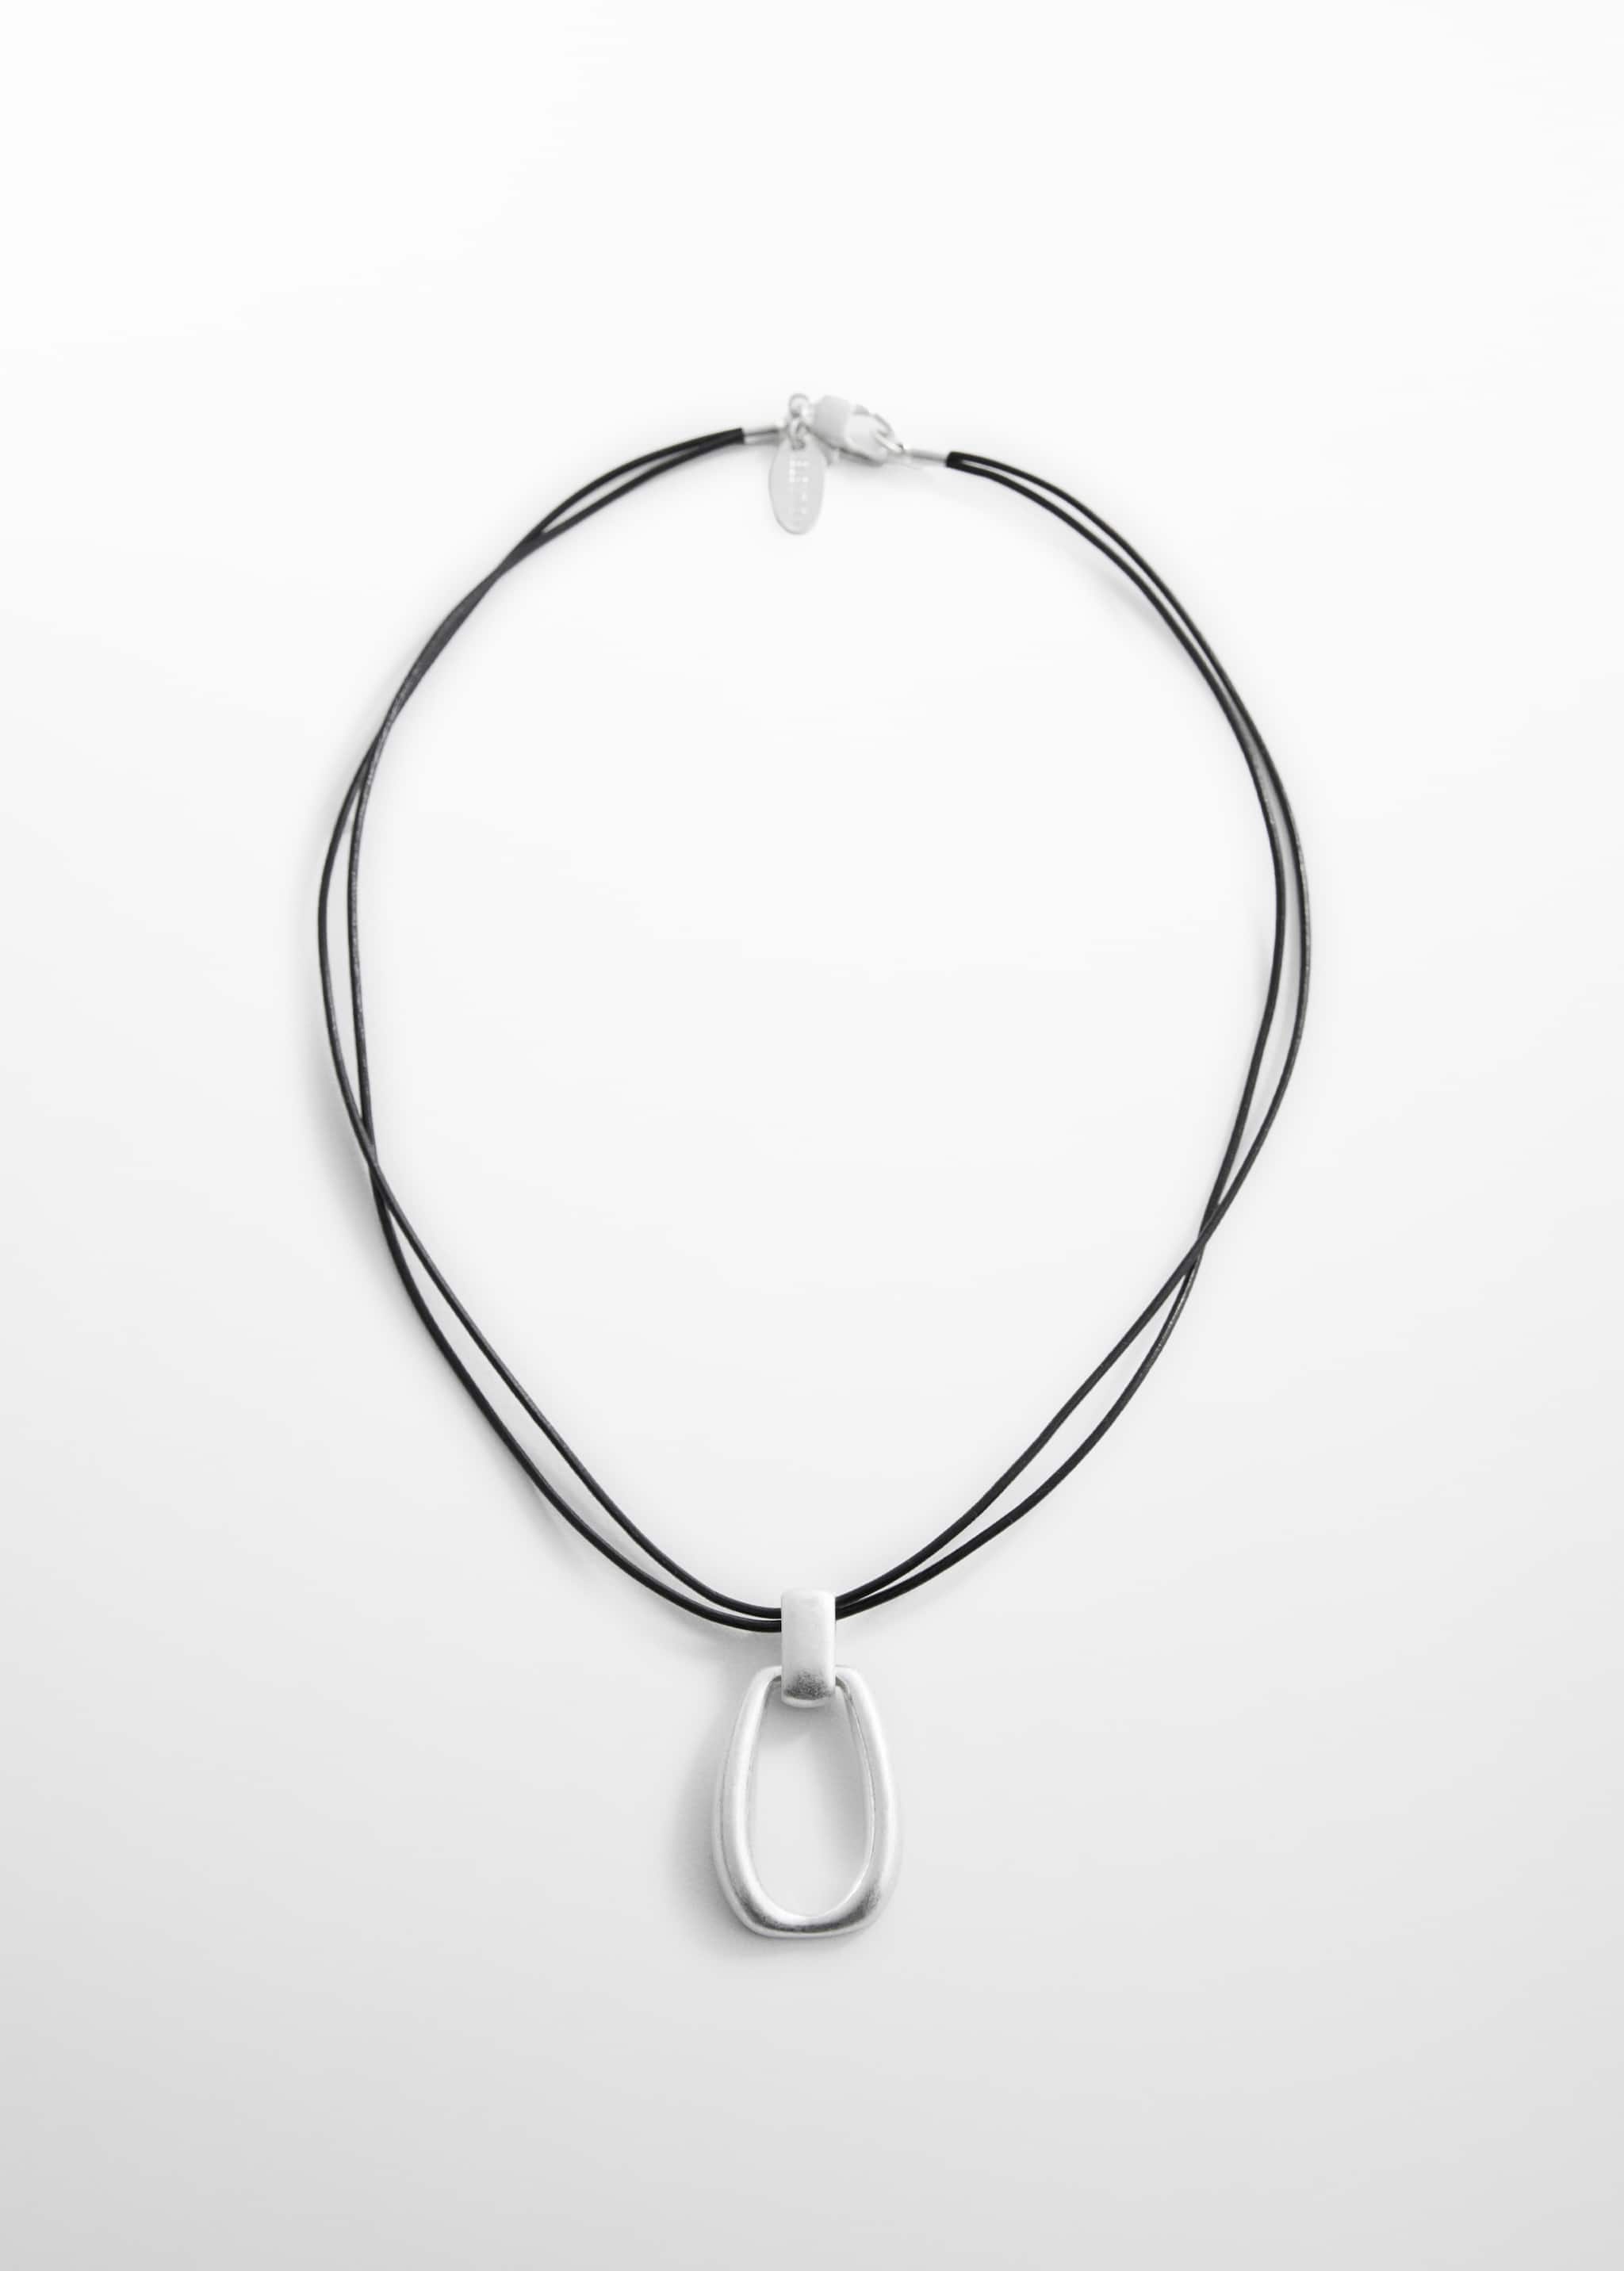 Metal pendant leather necklace - Article without model